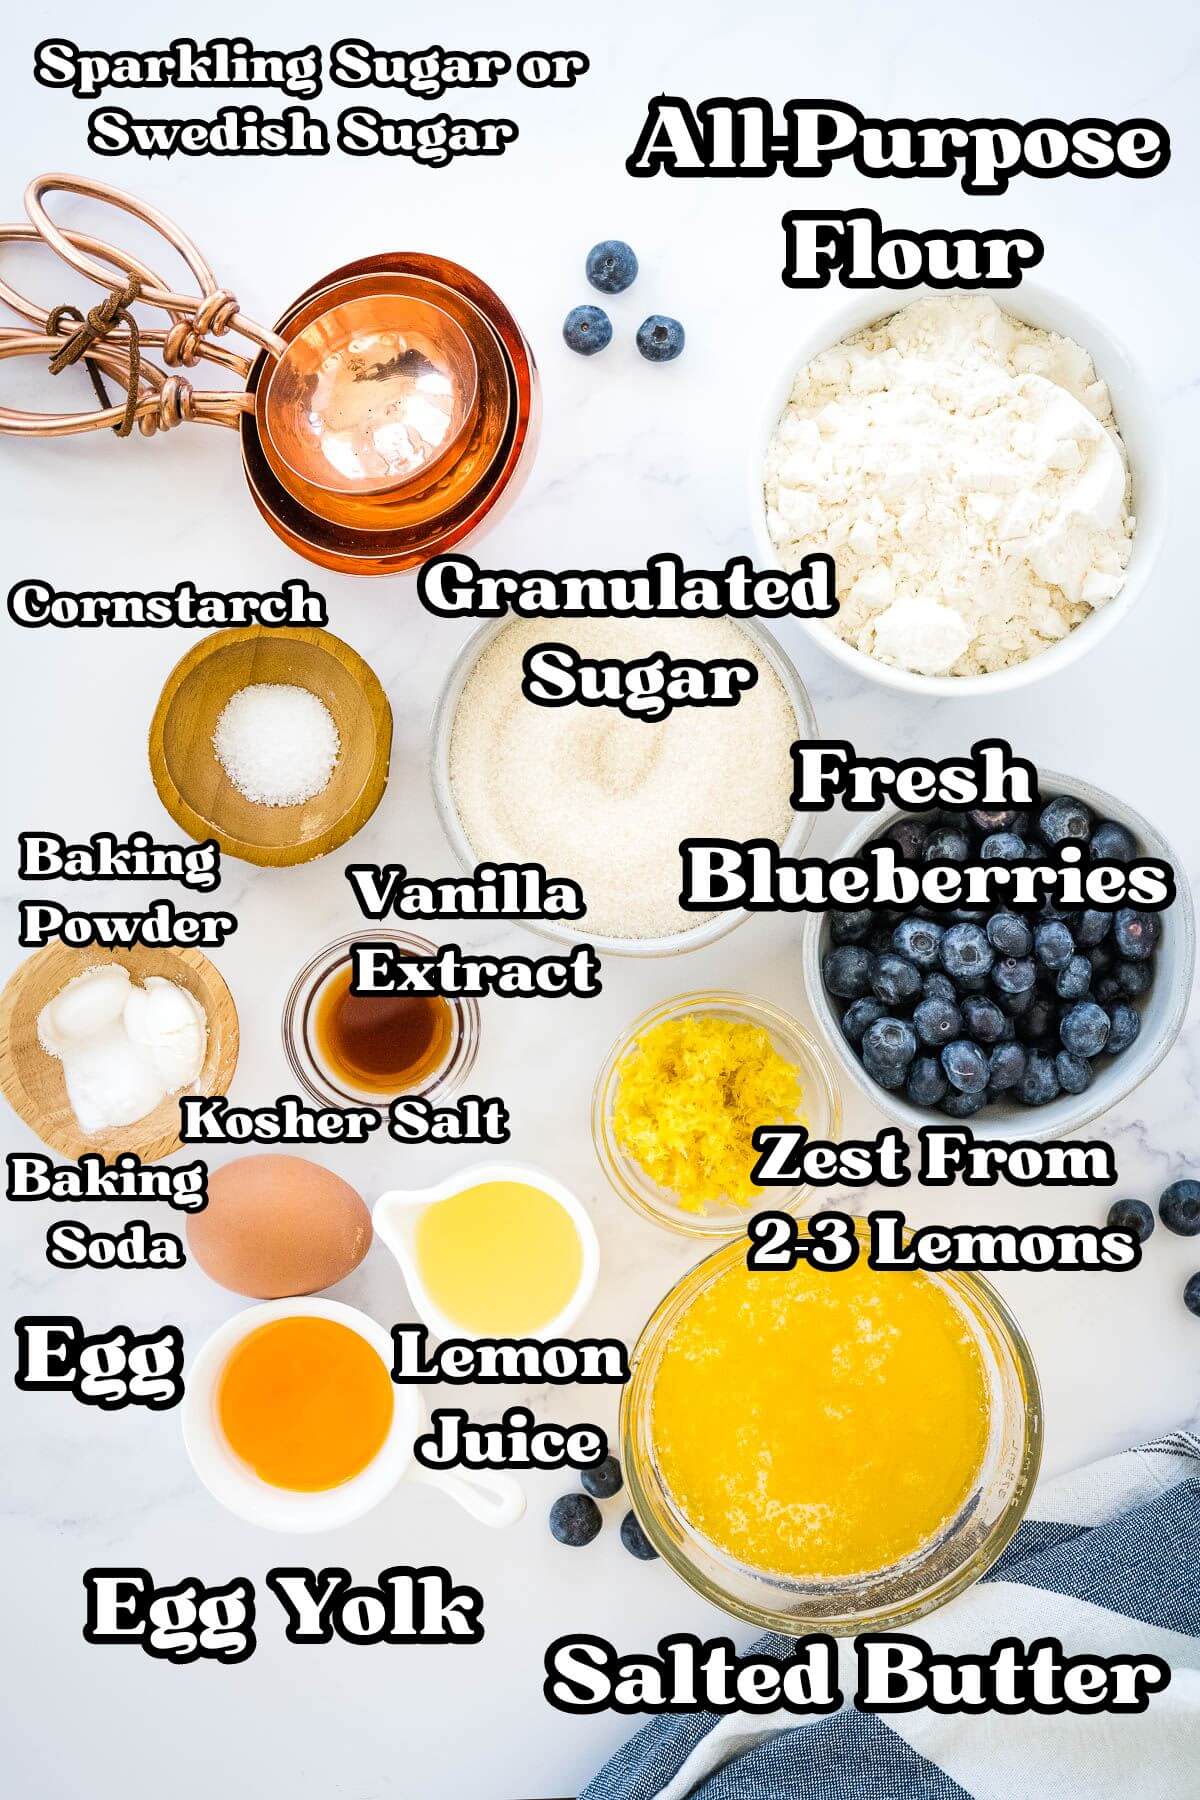 Labeled ingredients for blueberry lemon cookies.